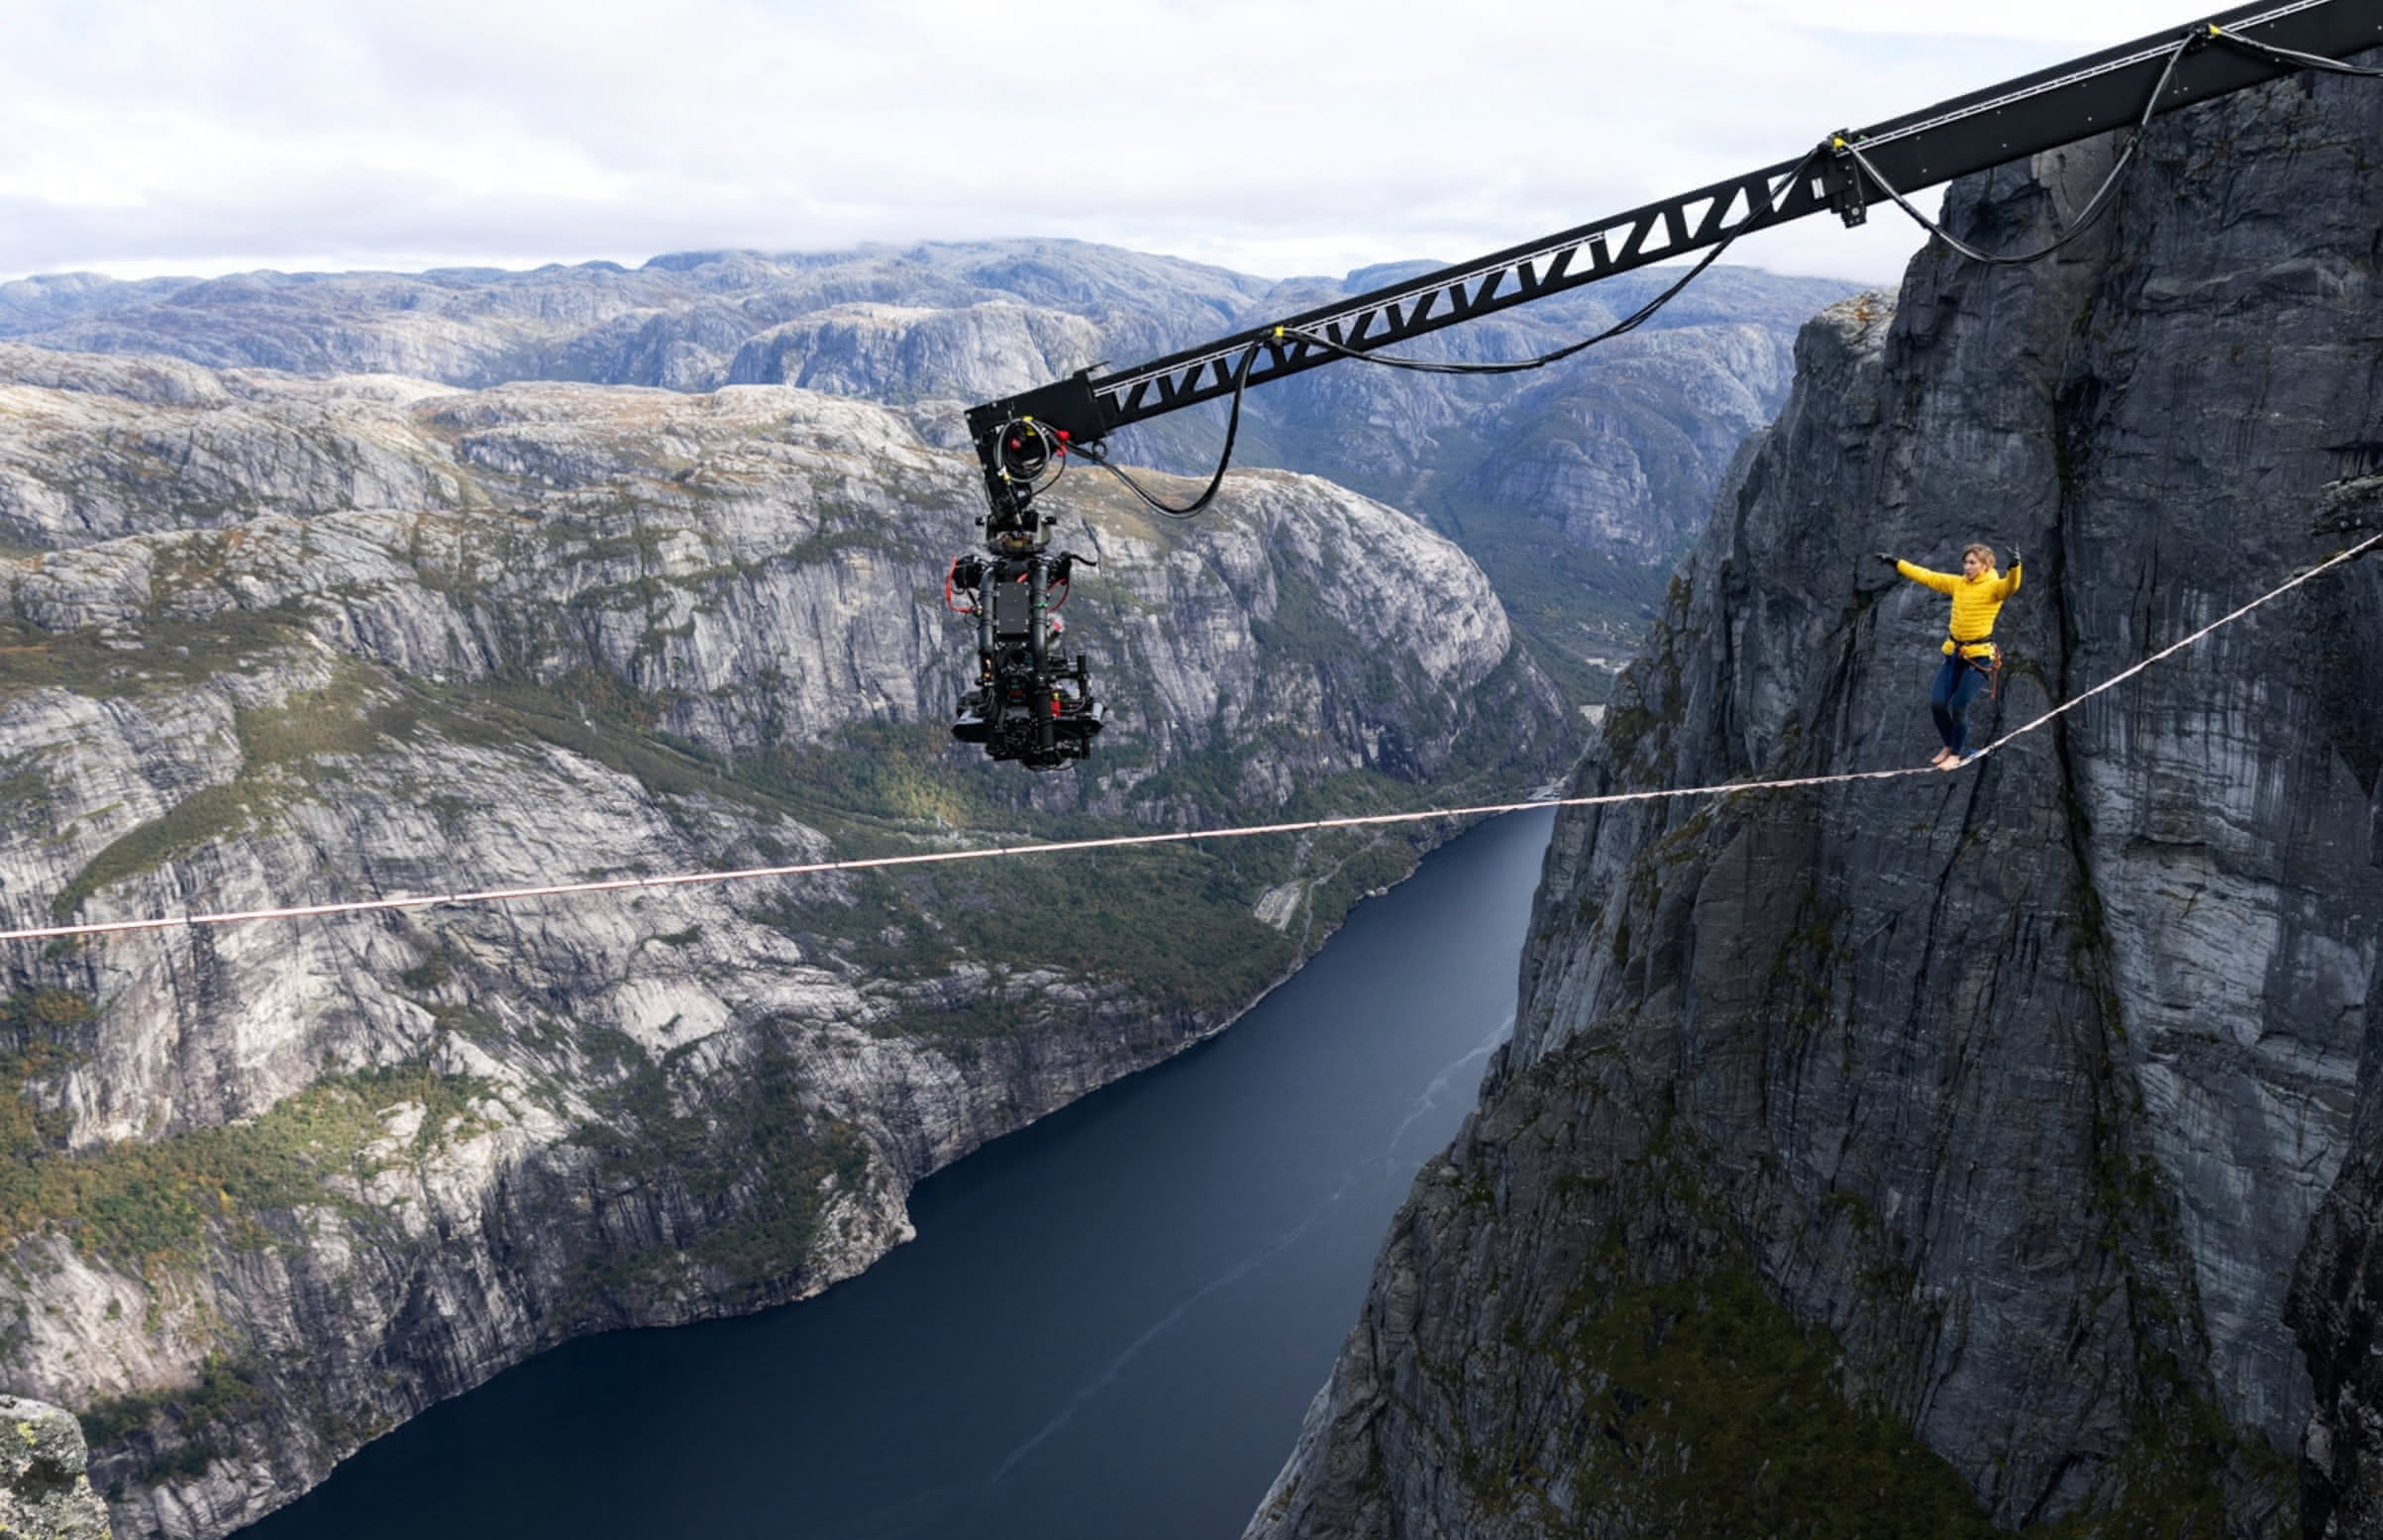 A person in a yellow jacket walking across a rope spread over a valley, with a large camera on a crane recording her.